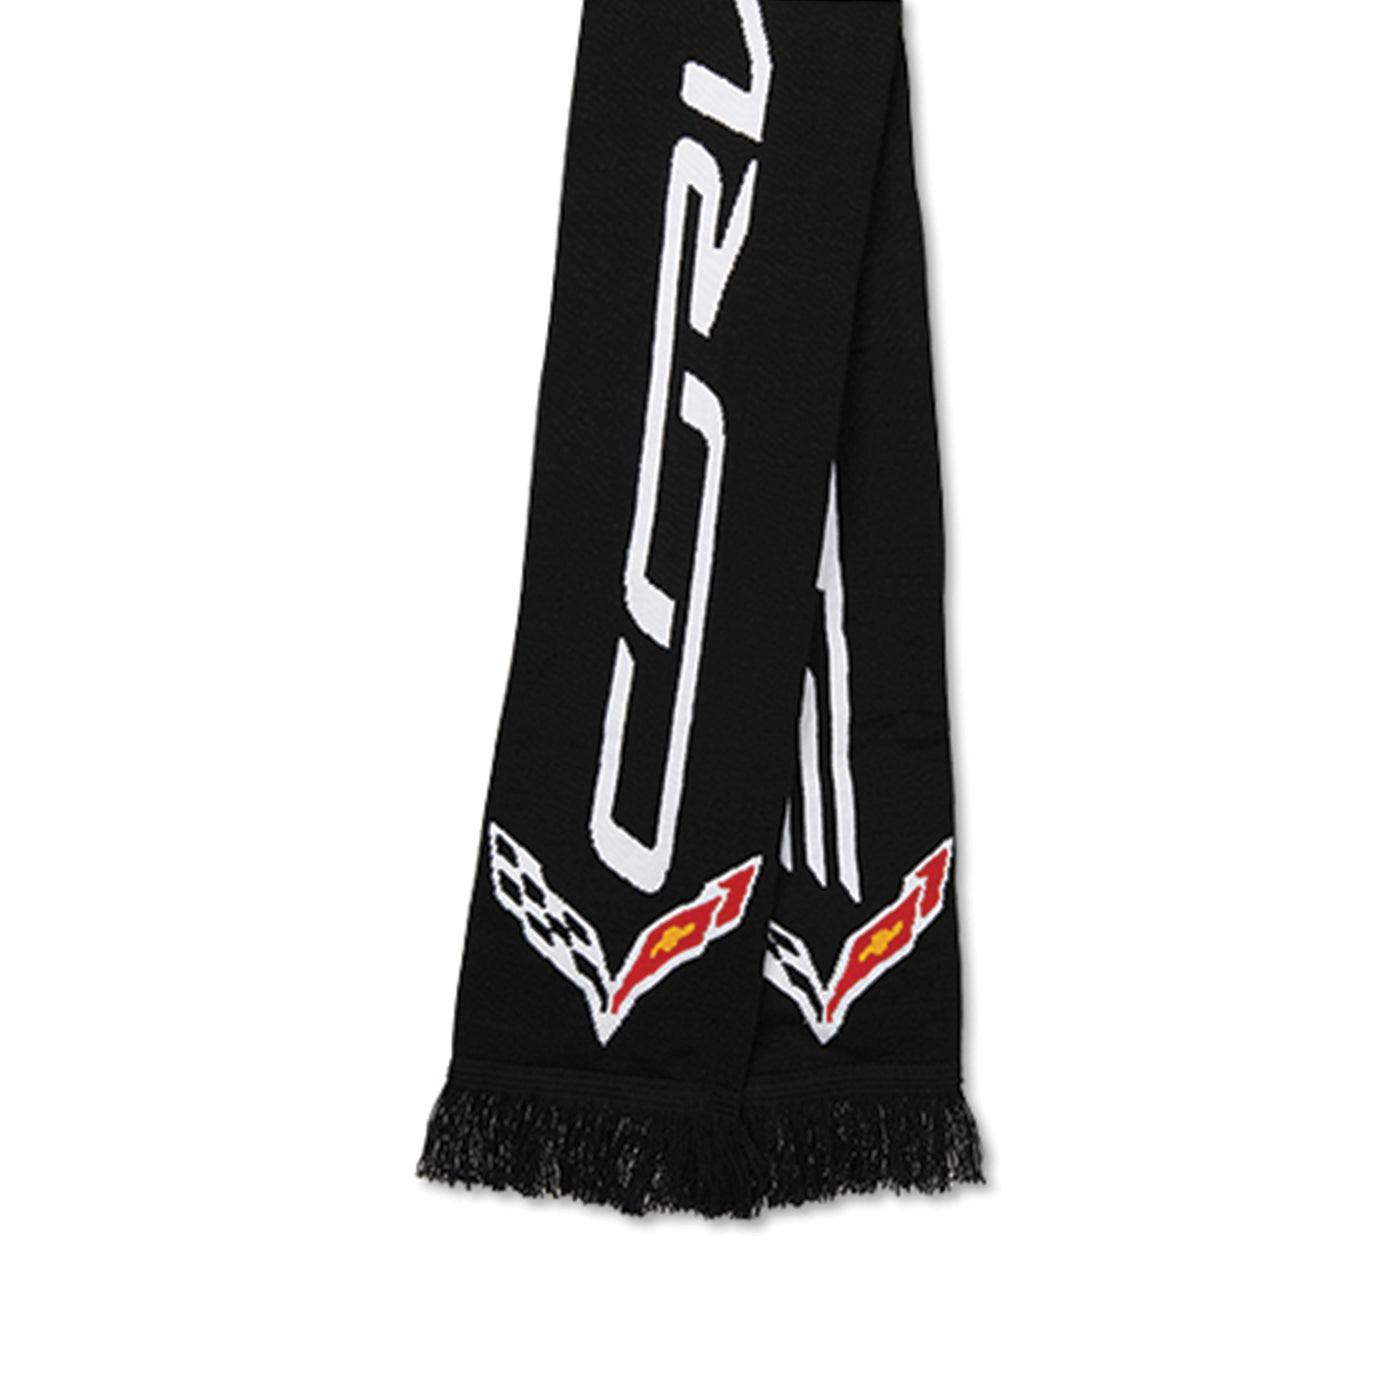 C7 Corvette Knitted Scarf